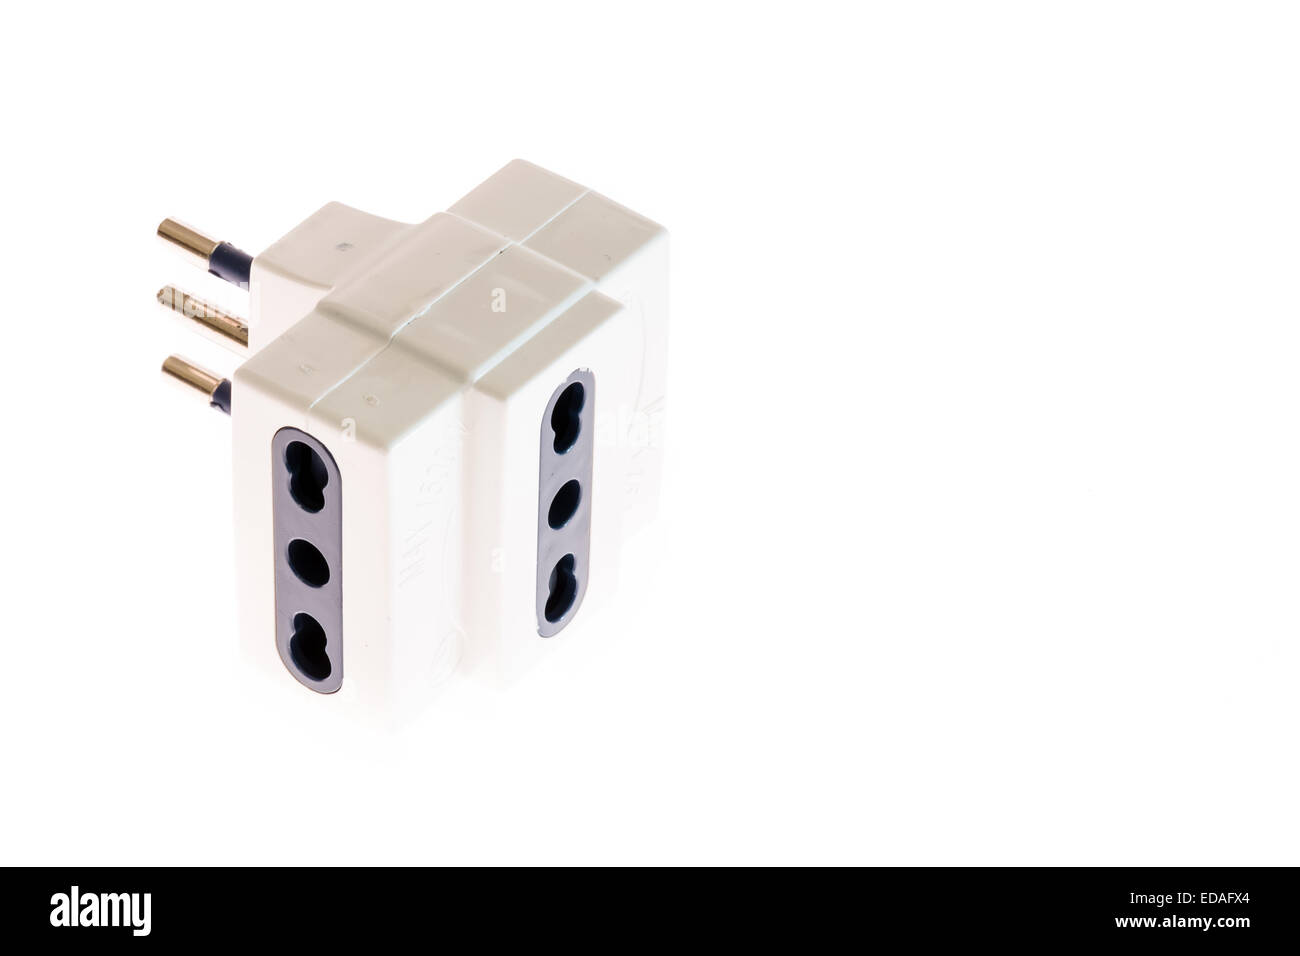 Withe Italian plug 16 ampere and adapter Stock Photo